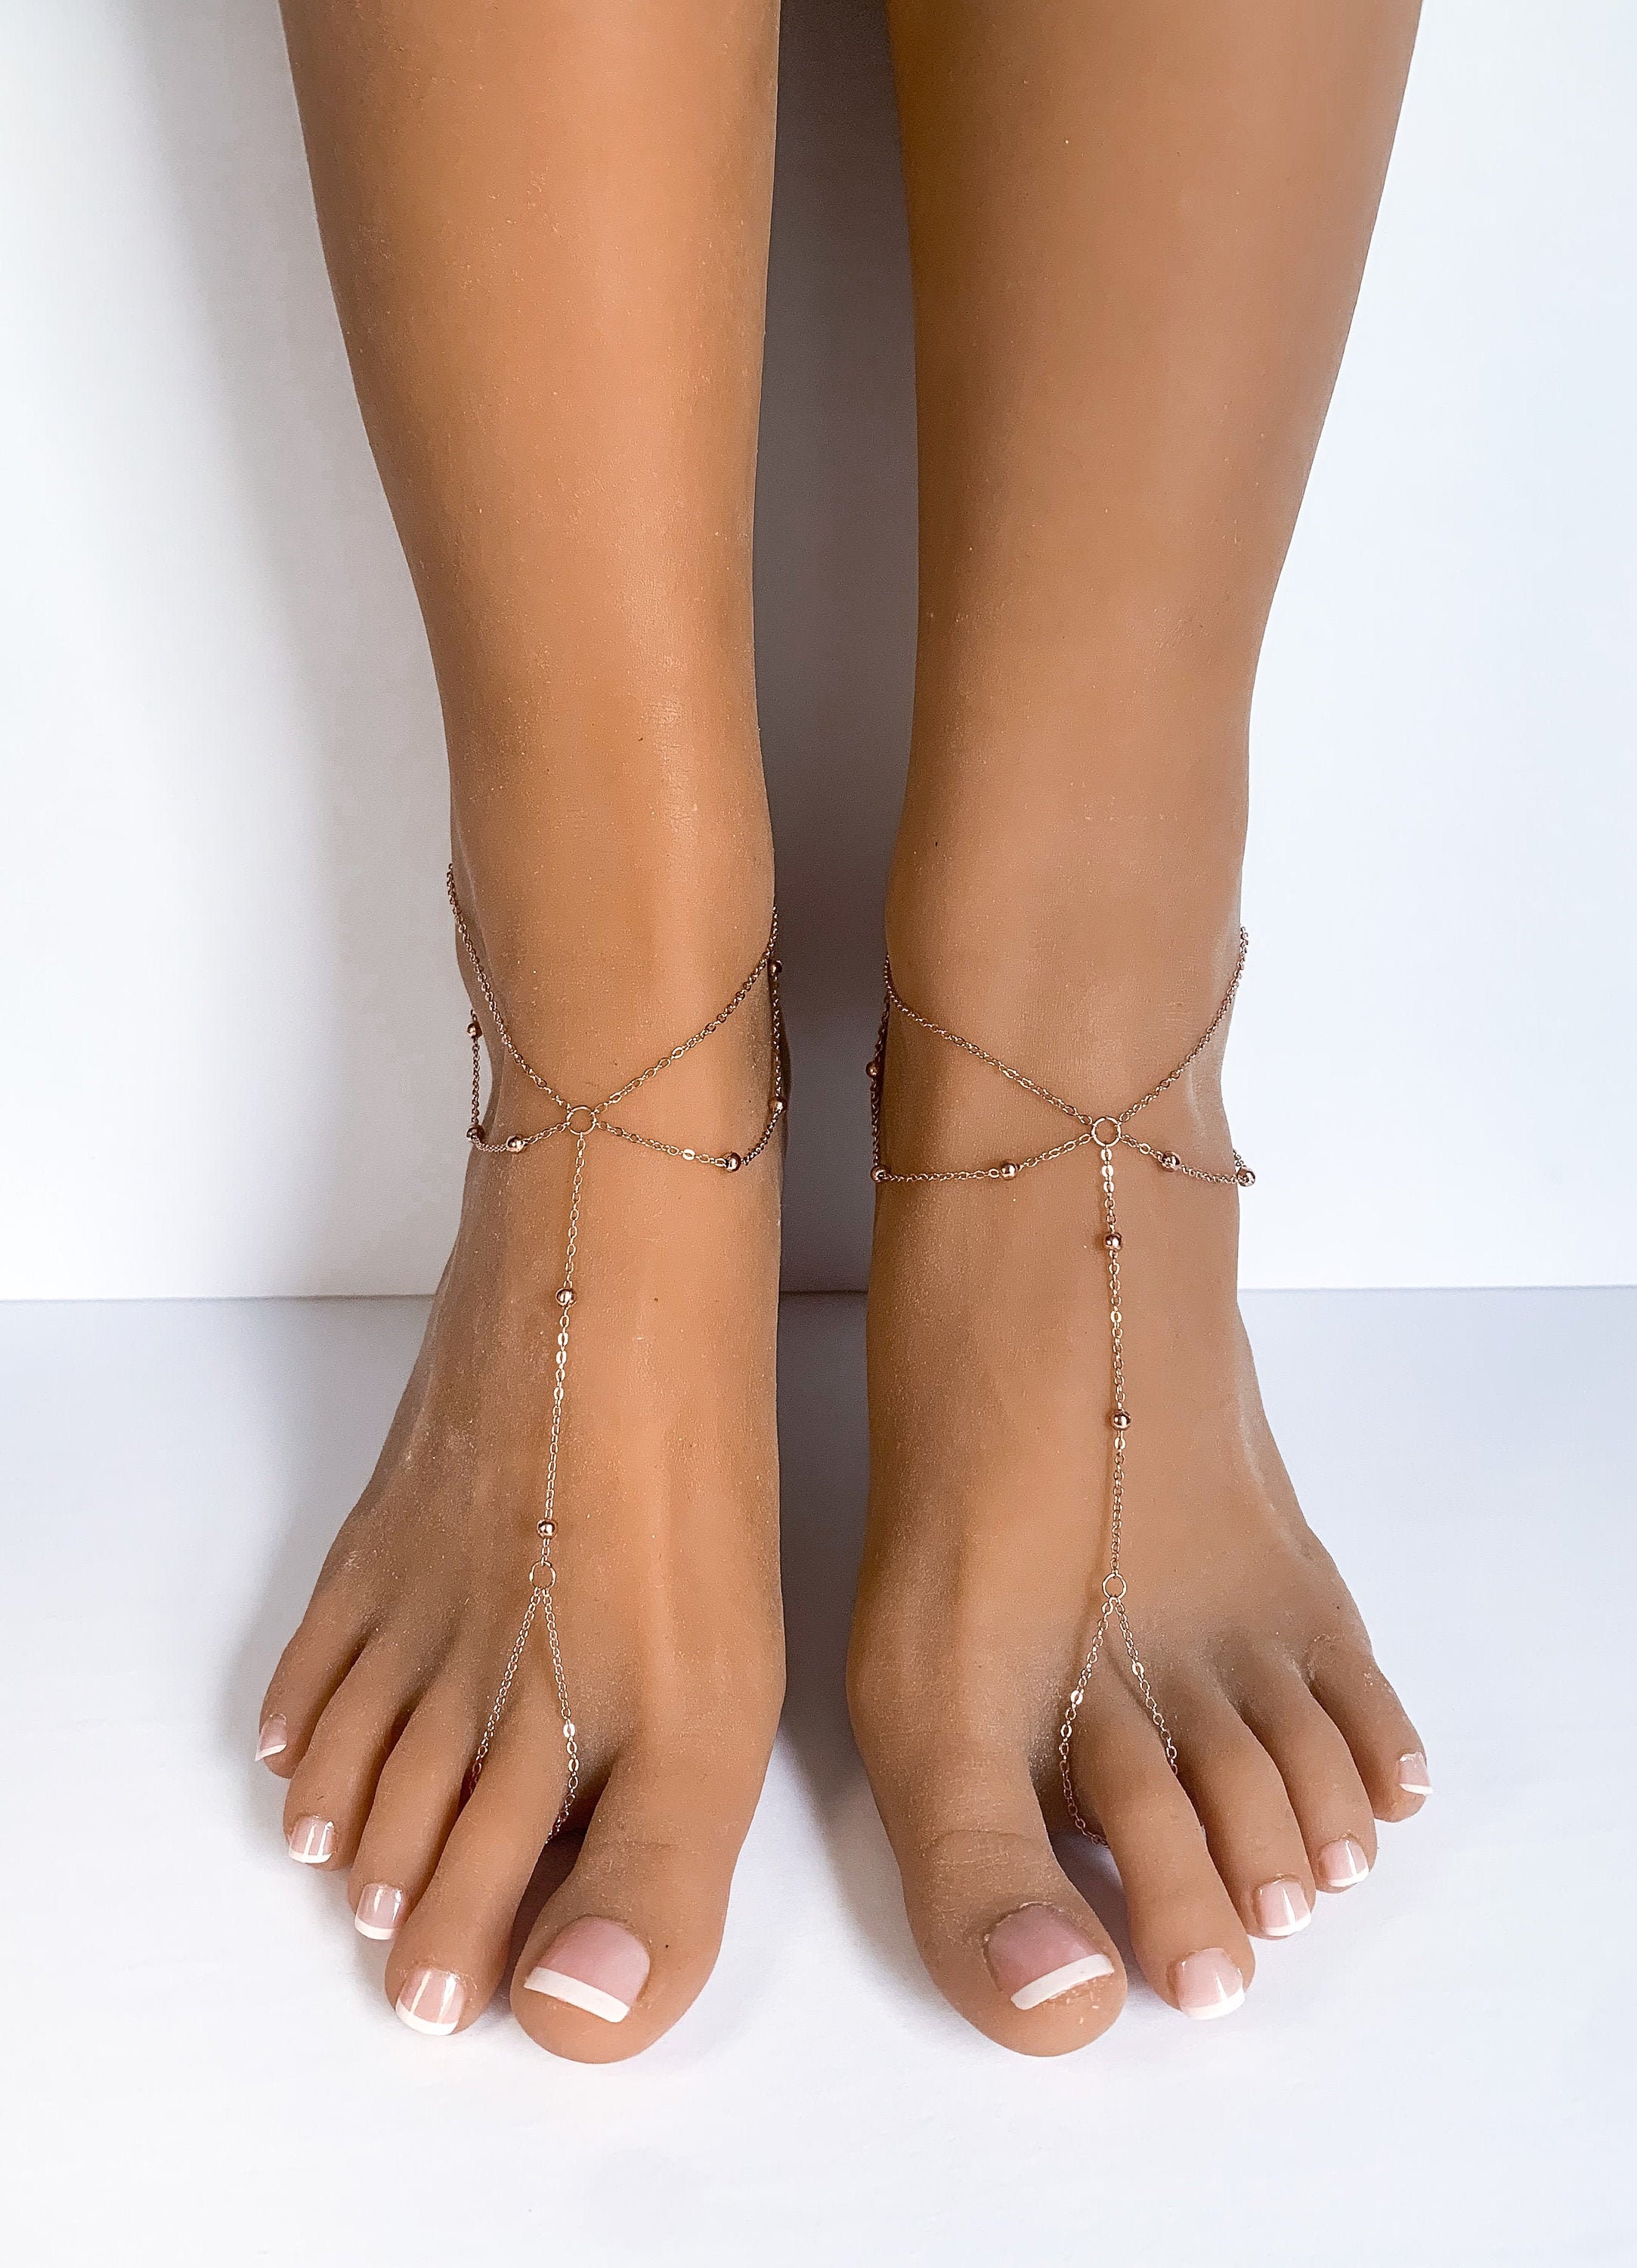 Foot Jewelry - Excellent Footwear Choice for the Modern Feet